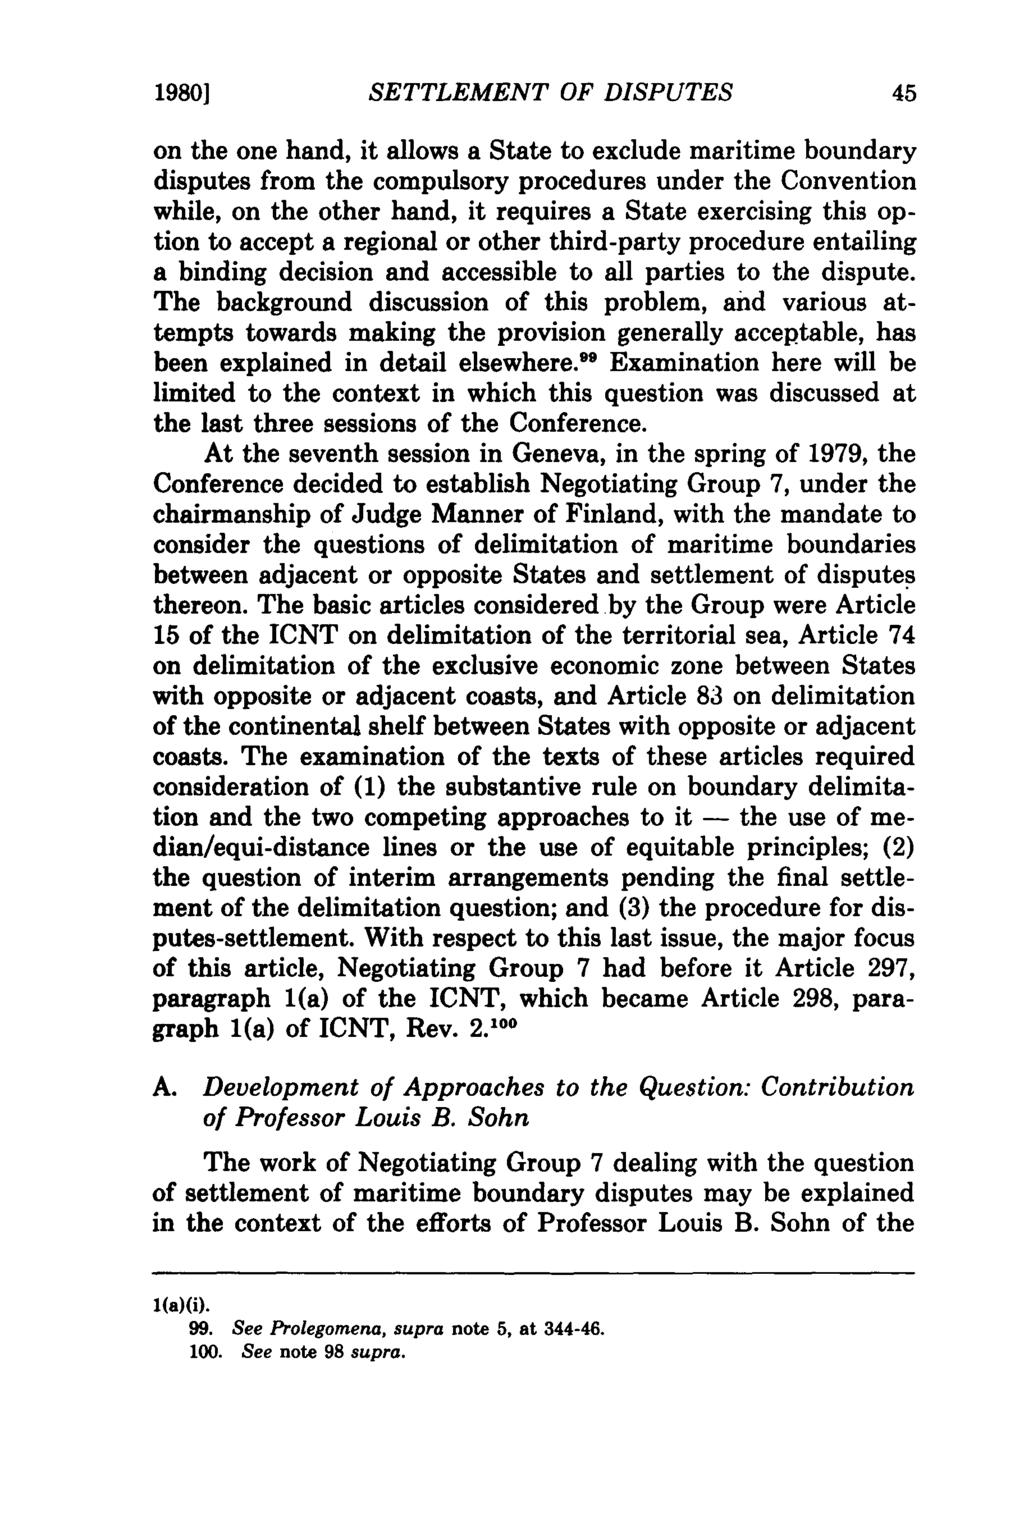 1980] SETTLEMENT OF DISPUTES on the one hand, it allows a State to exclude maritime boundary disputes from the compulsory procedures under the Convention while, on the other hand, it requires a State